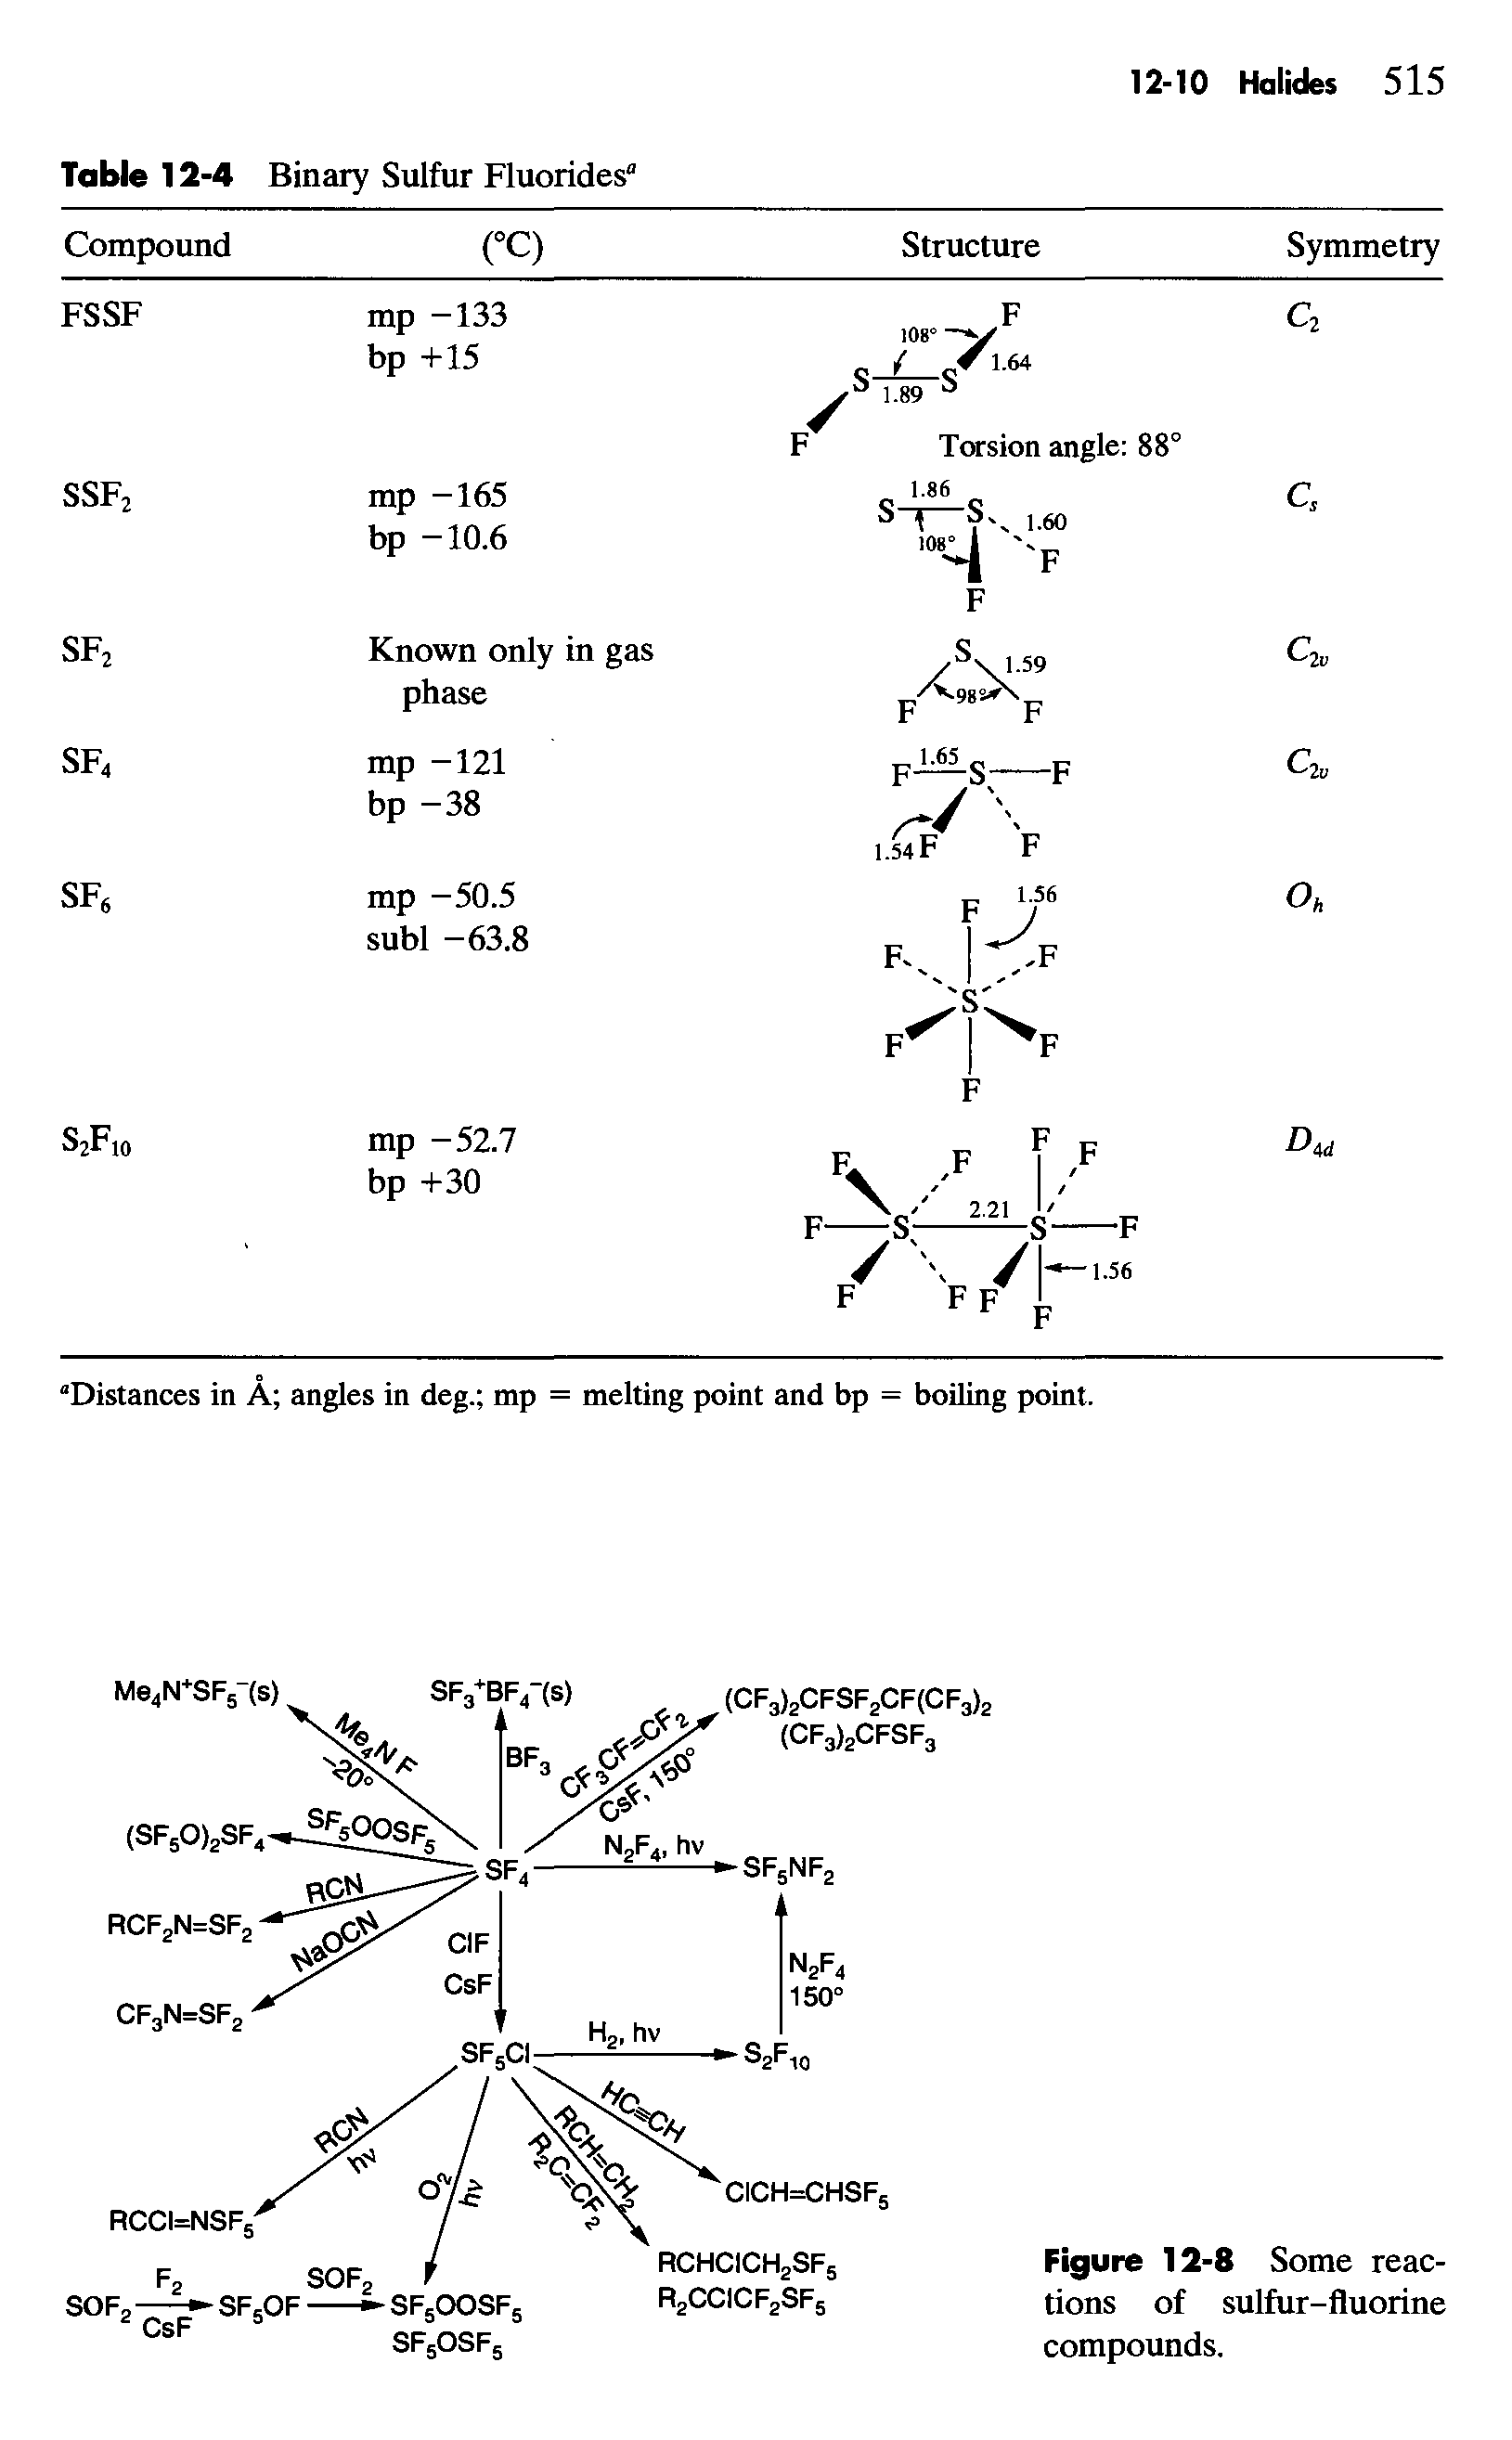 Figure 12-8 Some reactions of sulfur-fluorine compounds.